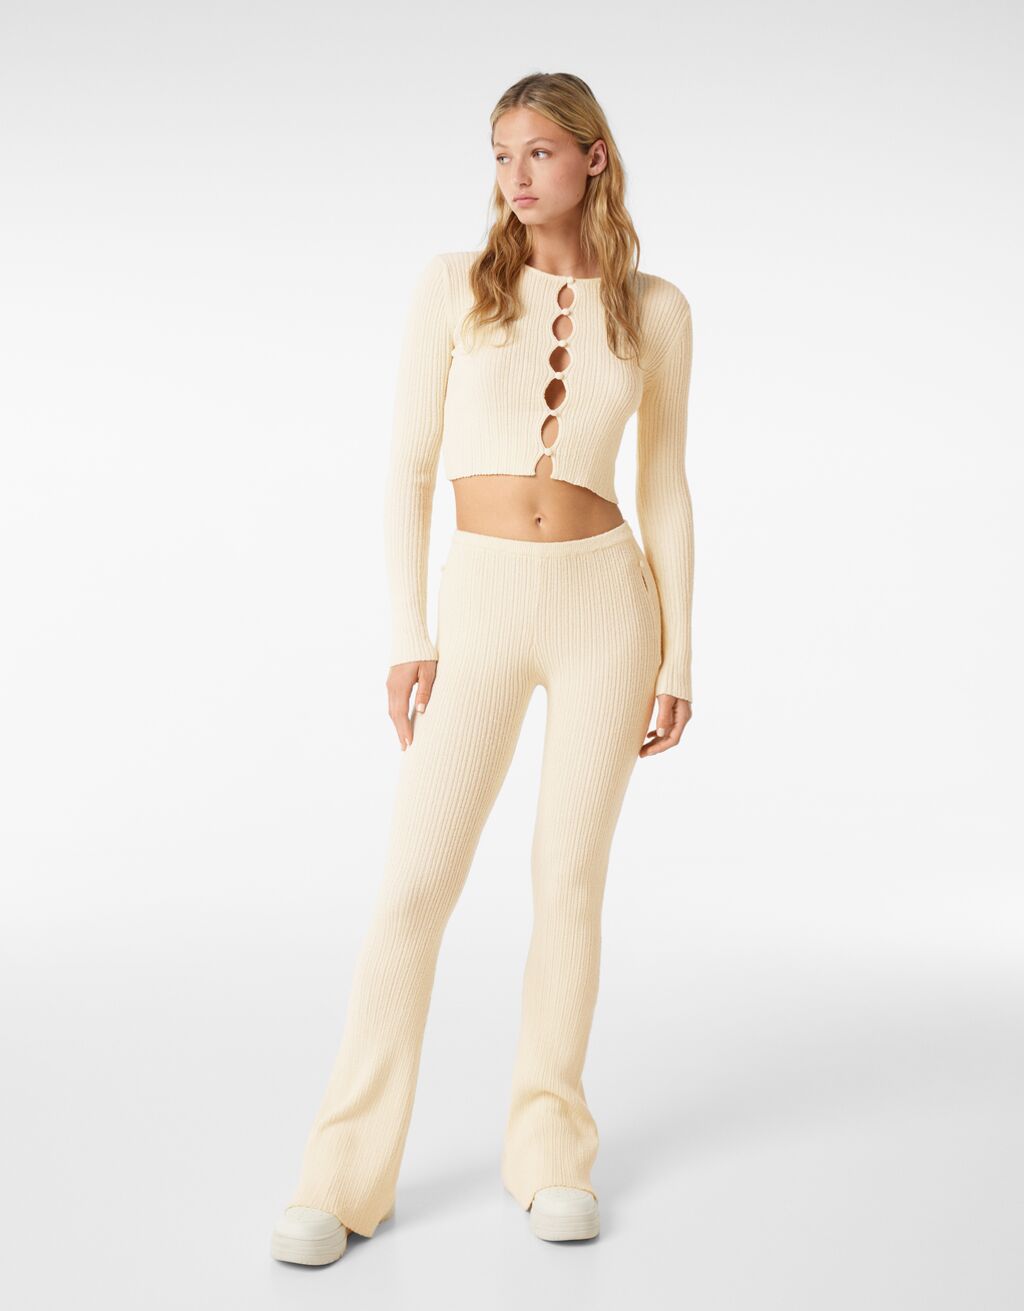 Rustic knit bell bottom trousers